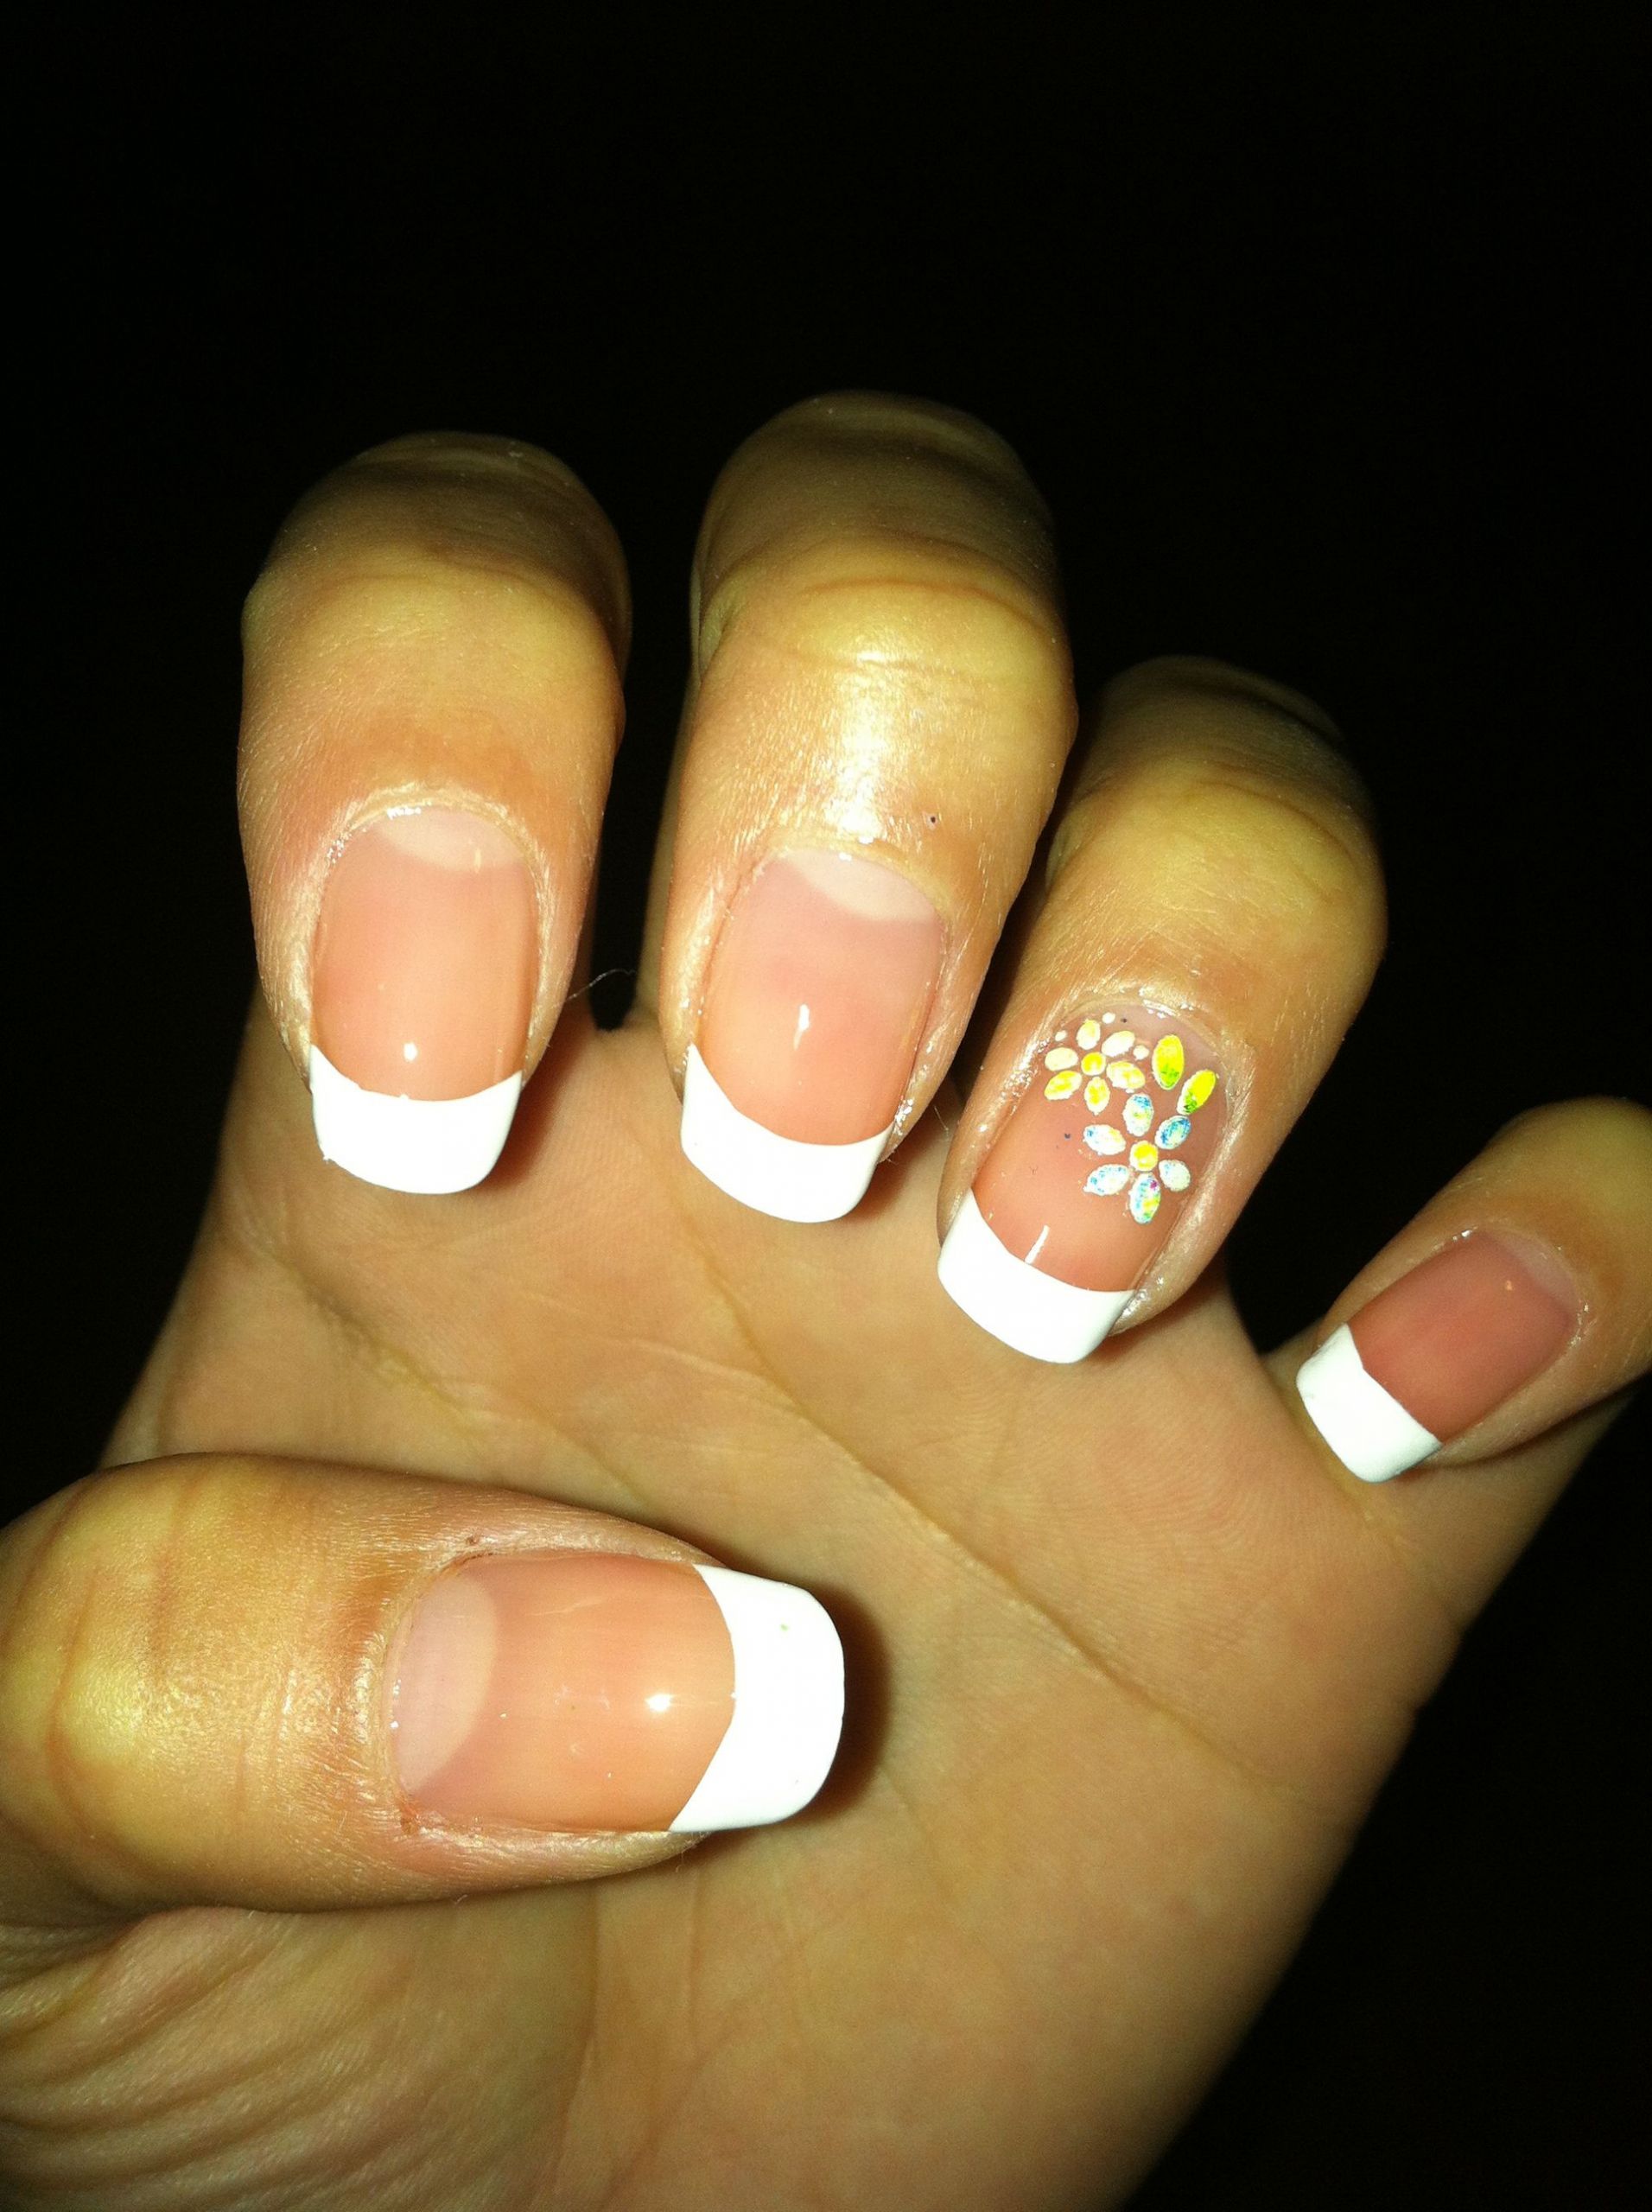 Ring Finger Nail Art
 French Tip With Flowers The Ring Finger